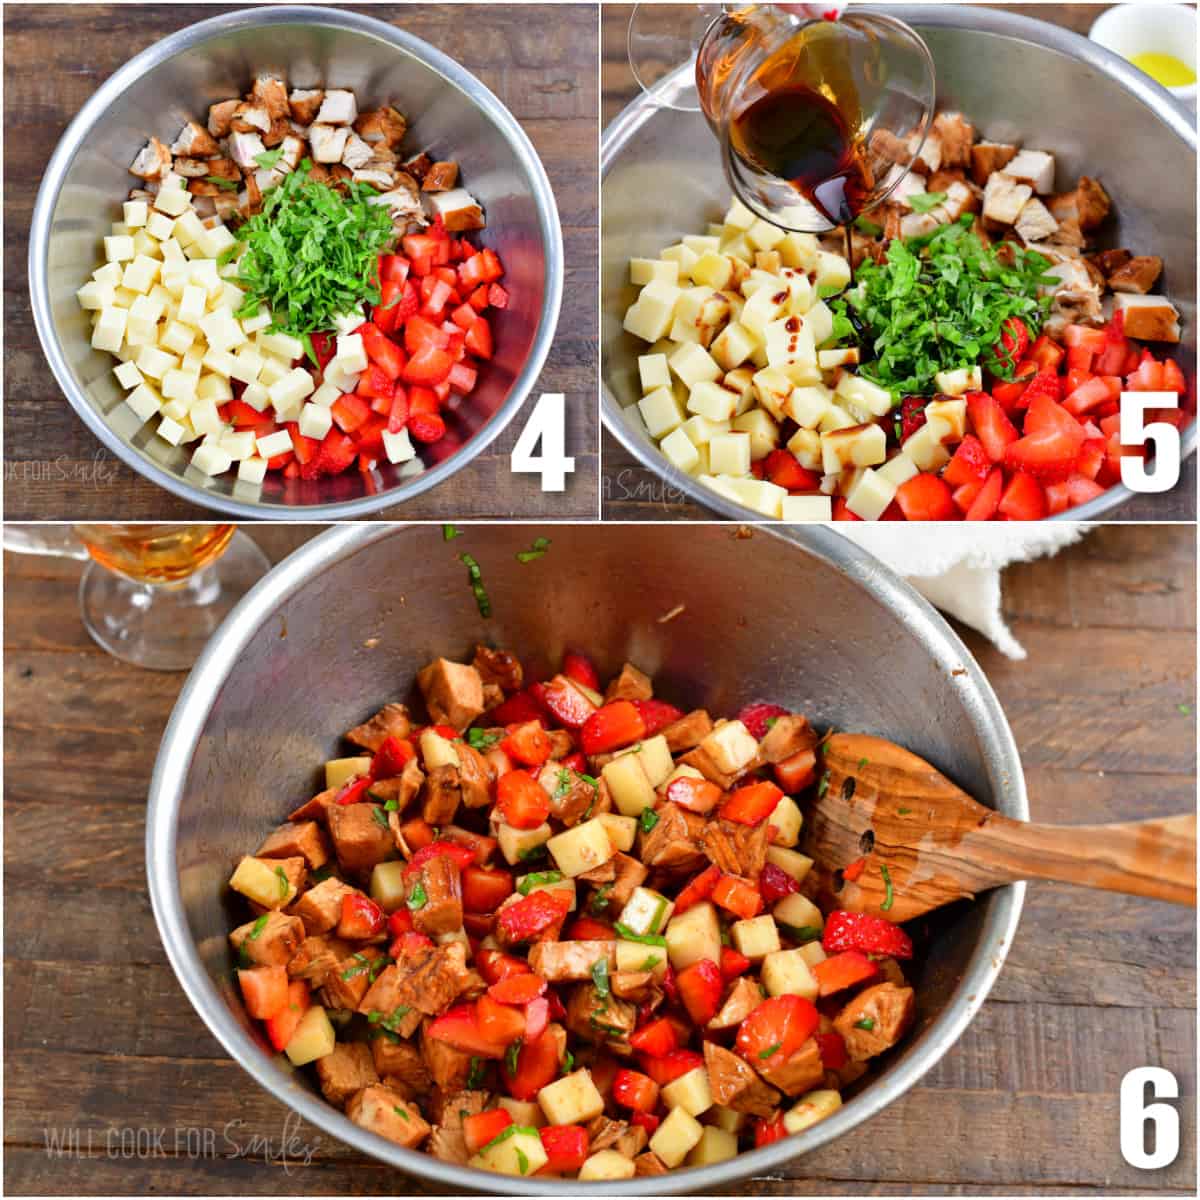 In the first photo, the ingredients for the salad are placed in a bowl side by side. In the next photo, balsamic reduction is being poured onto the ingredients. In the final photo, everything has been tossed together. 